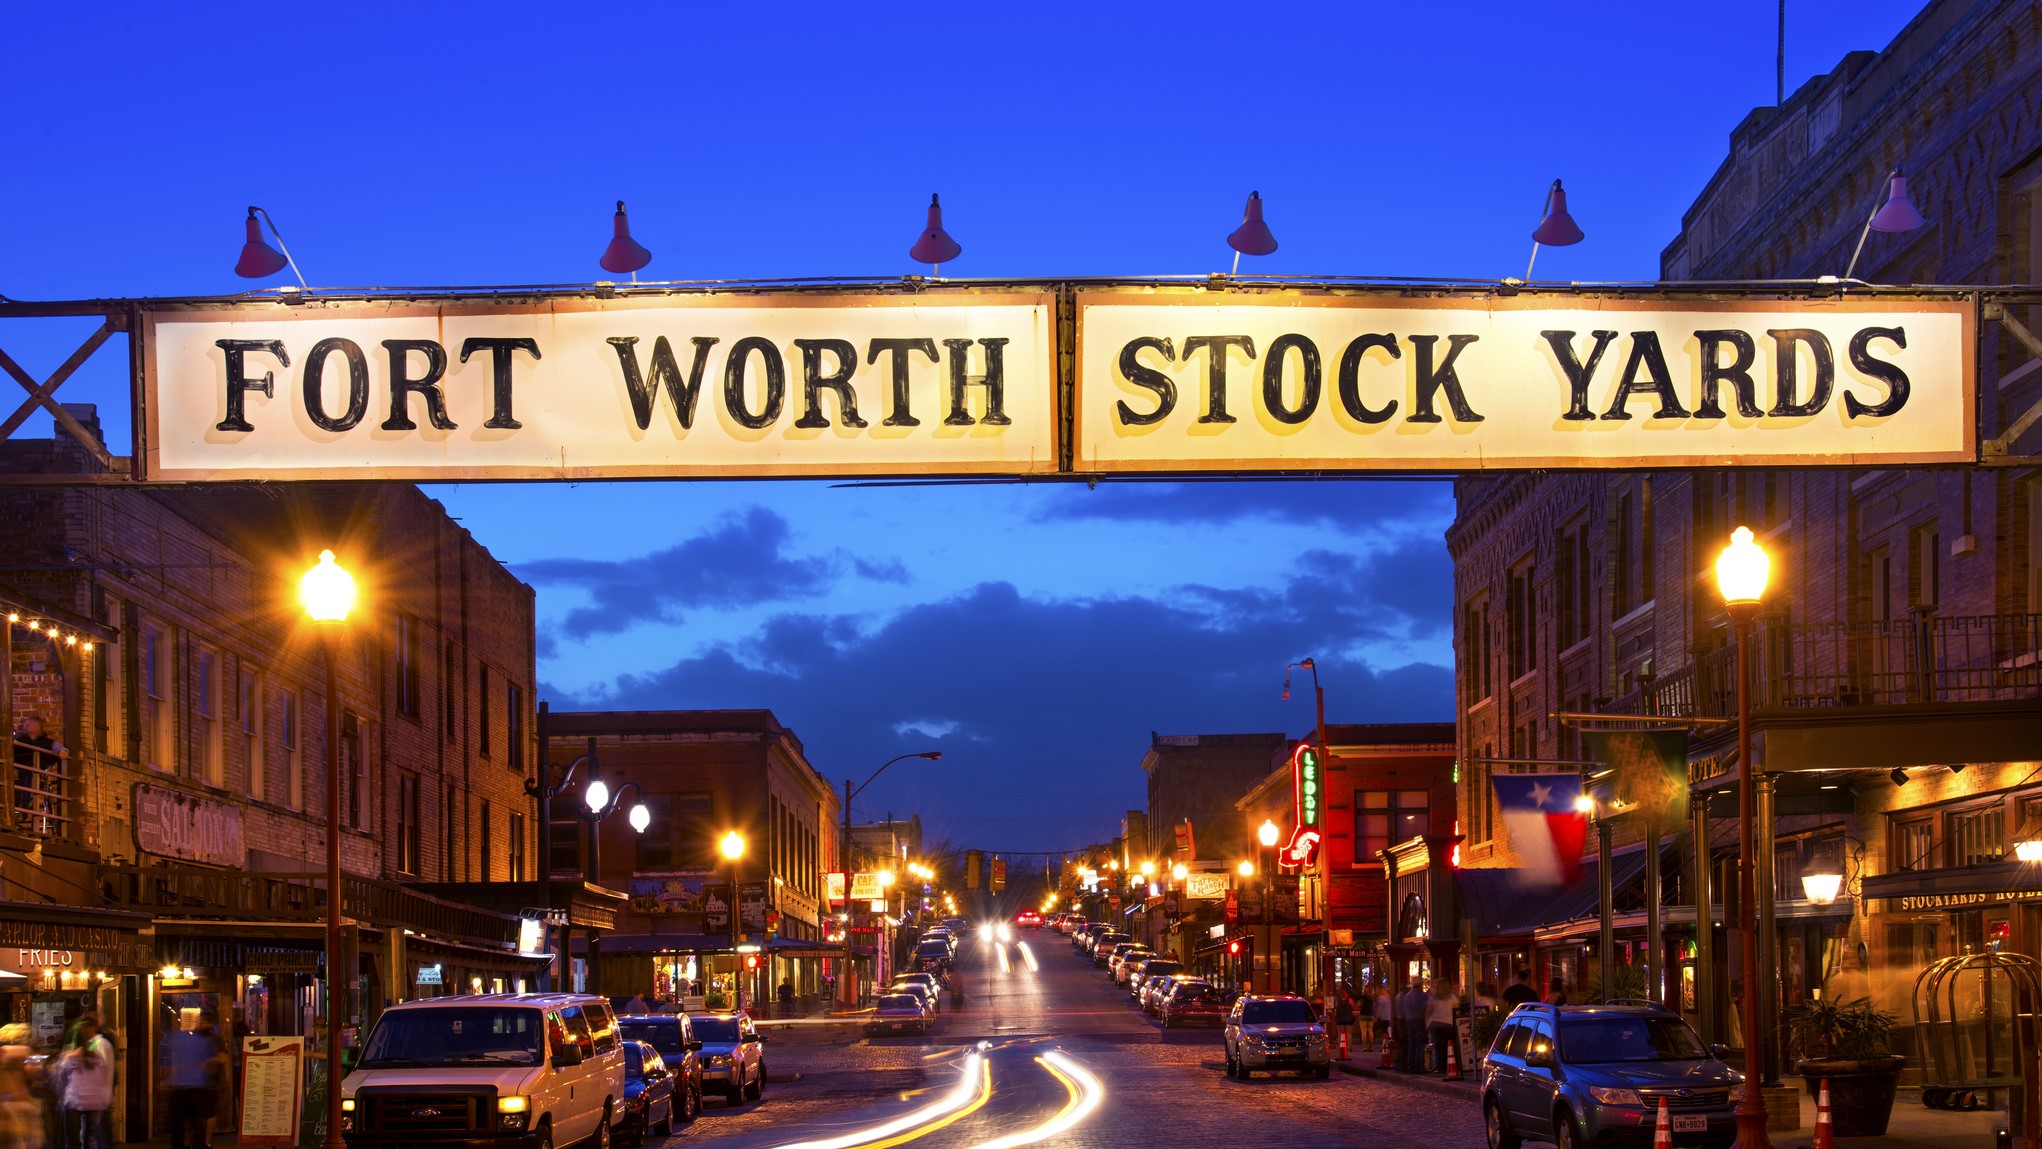 Fort Worth Stock Yards on Exchange Street is a historic district in Fort Worth, Texas. T